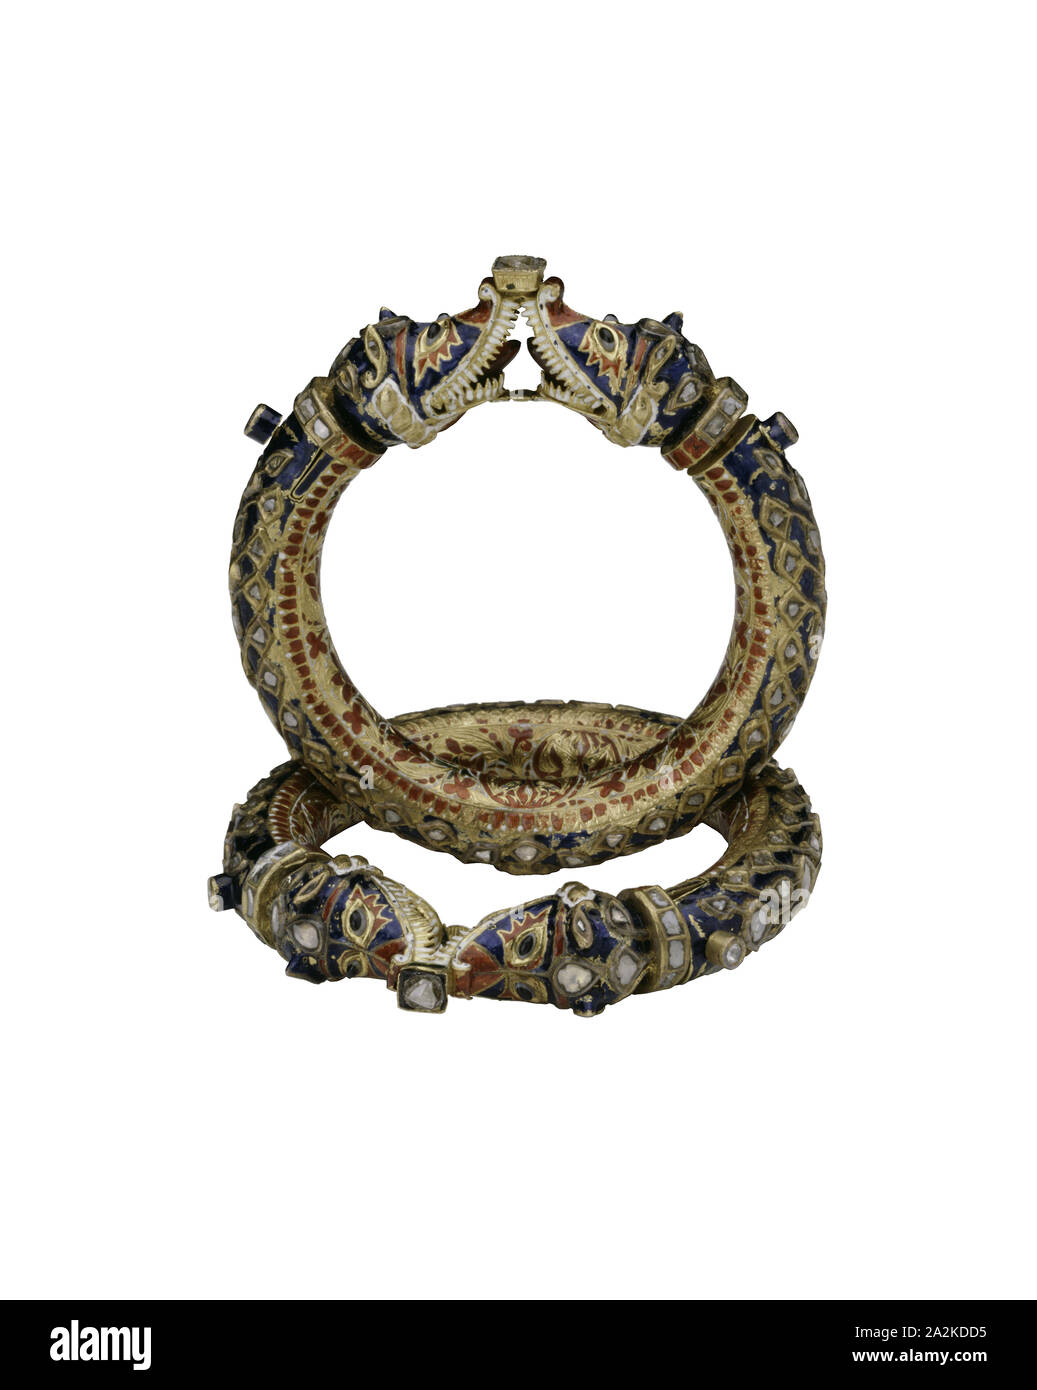 Bracelets with Confronting Makara Heads (Karas), 19th century, India, Rajasthan, Jaipur, India, Gold, diamonds, and crystalline inset in the kundan technique, with polychrome enamel (minakari), 9.9 x 8.9 x 1.4 cm (3 15/16 x 3 1/2 x 8/16 in Stock Photo